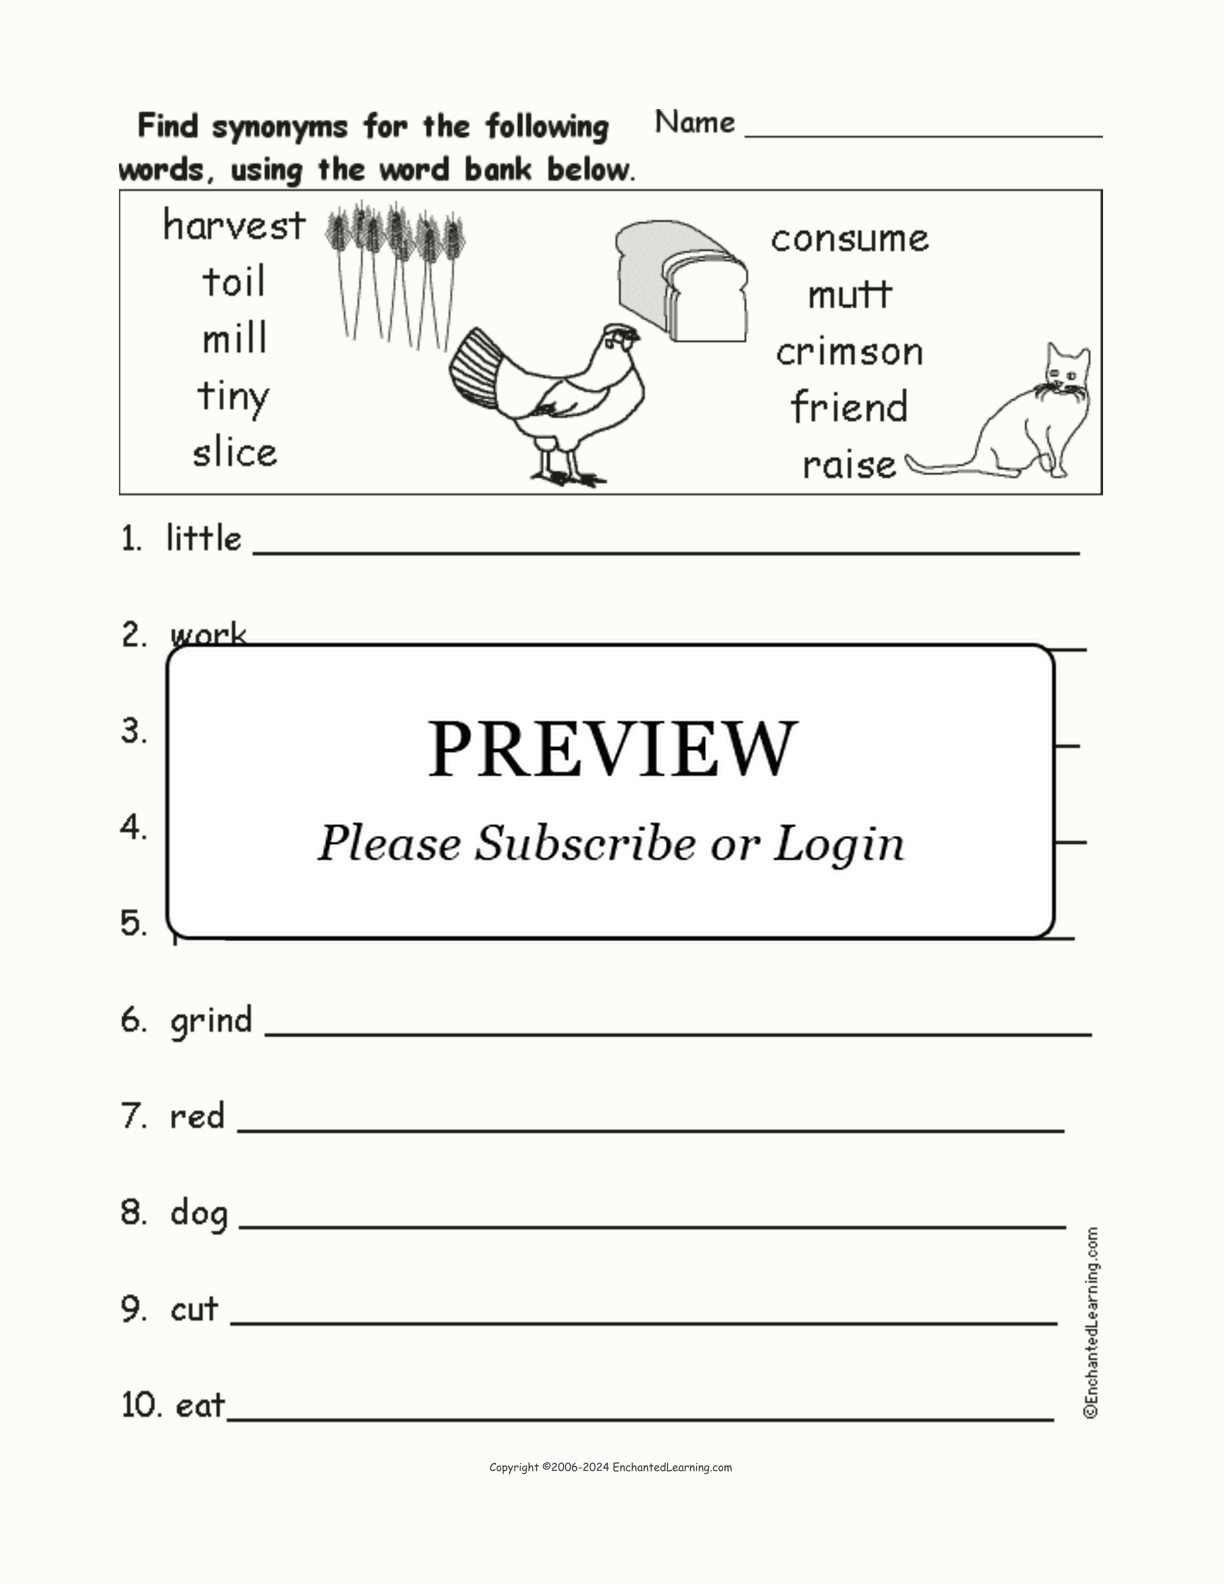 'The Little Red Hen' Synonyms interactive worksheet page 1